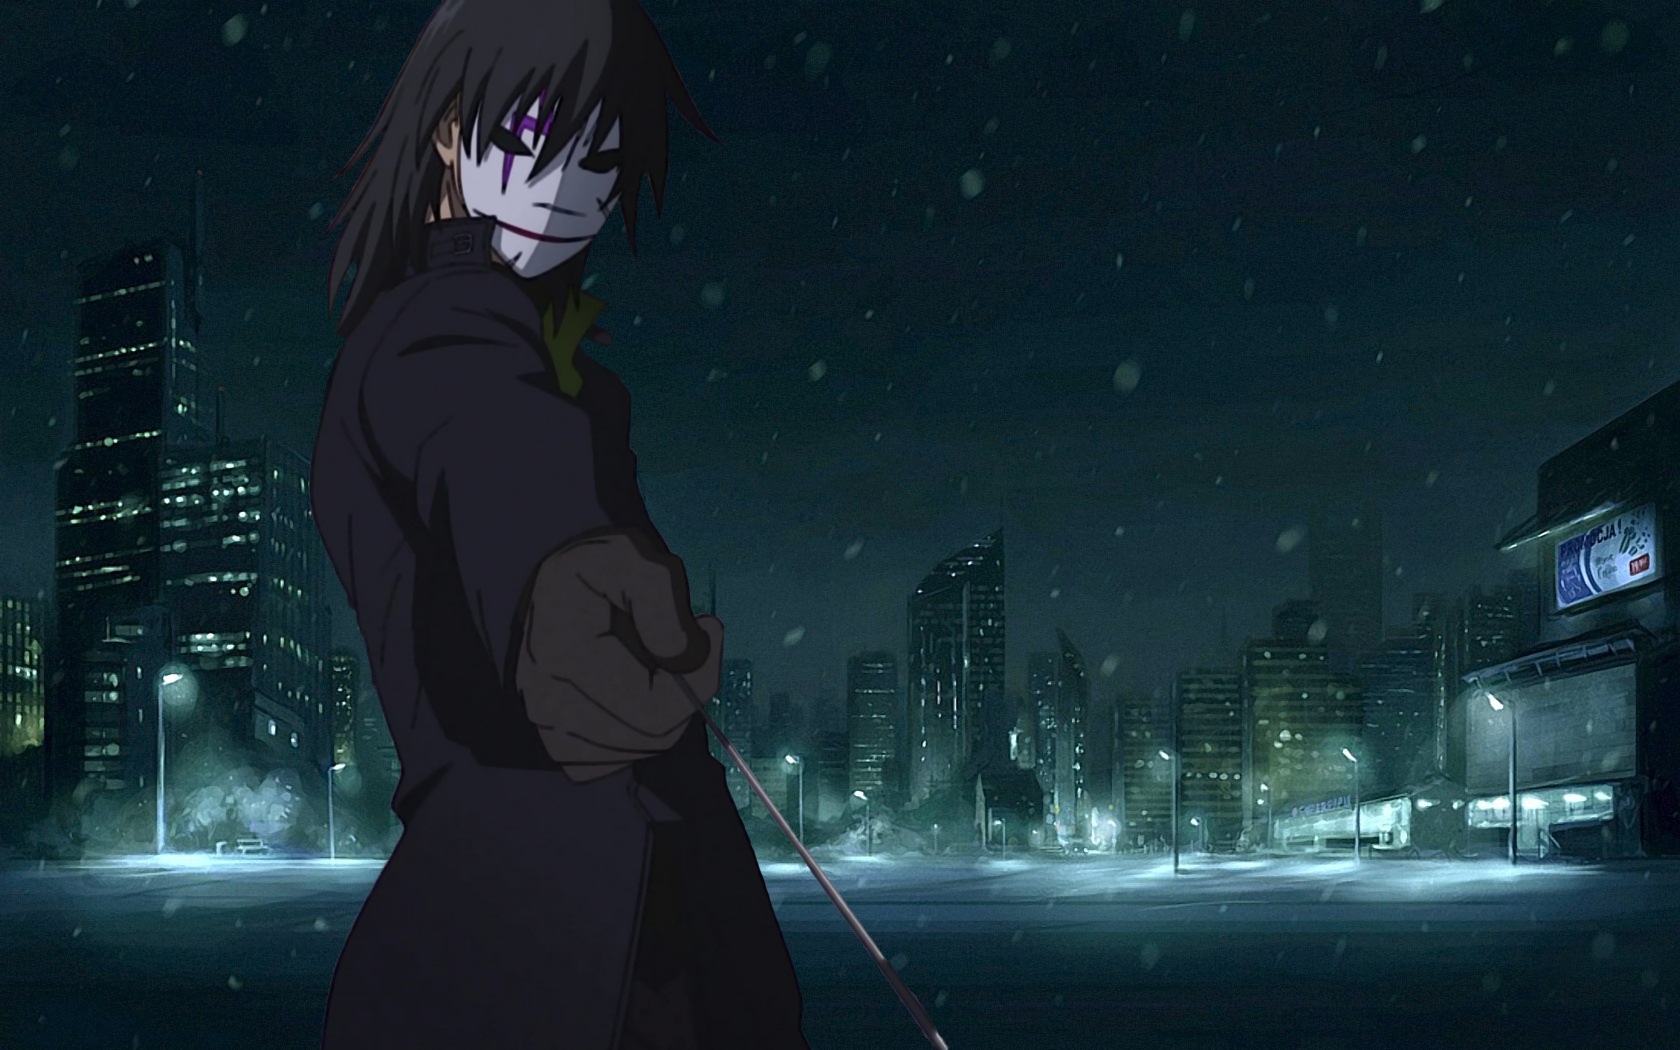 Hei from Darker than Black standing under the night sky.